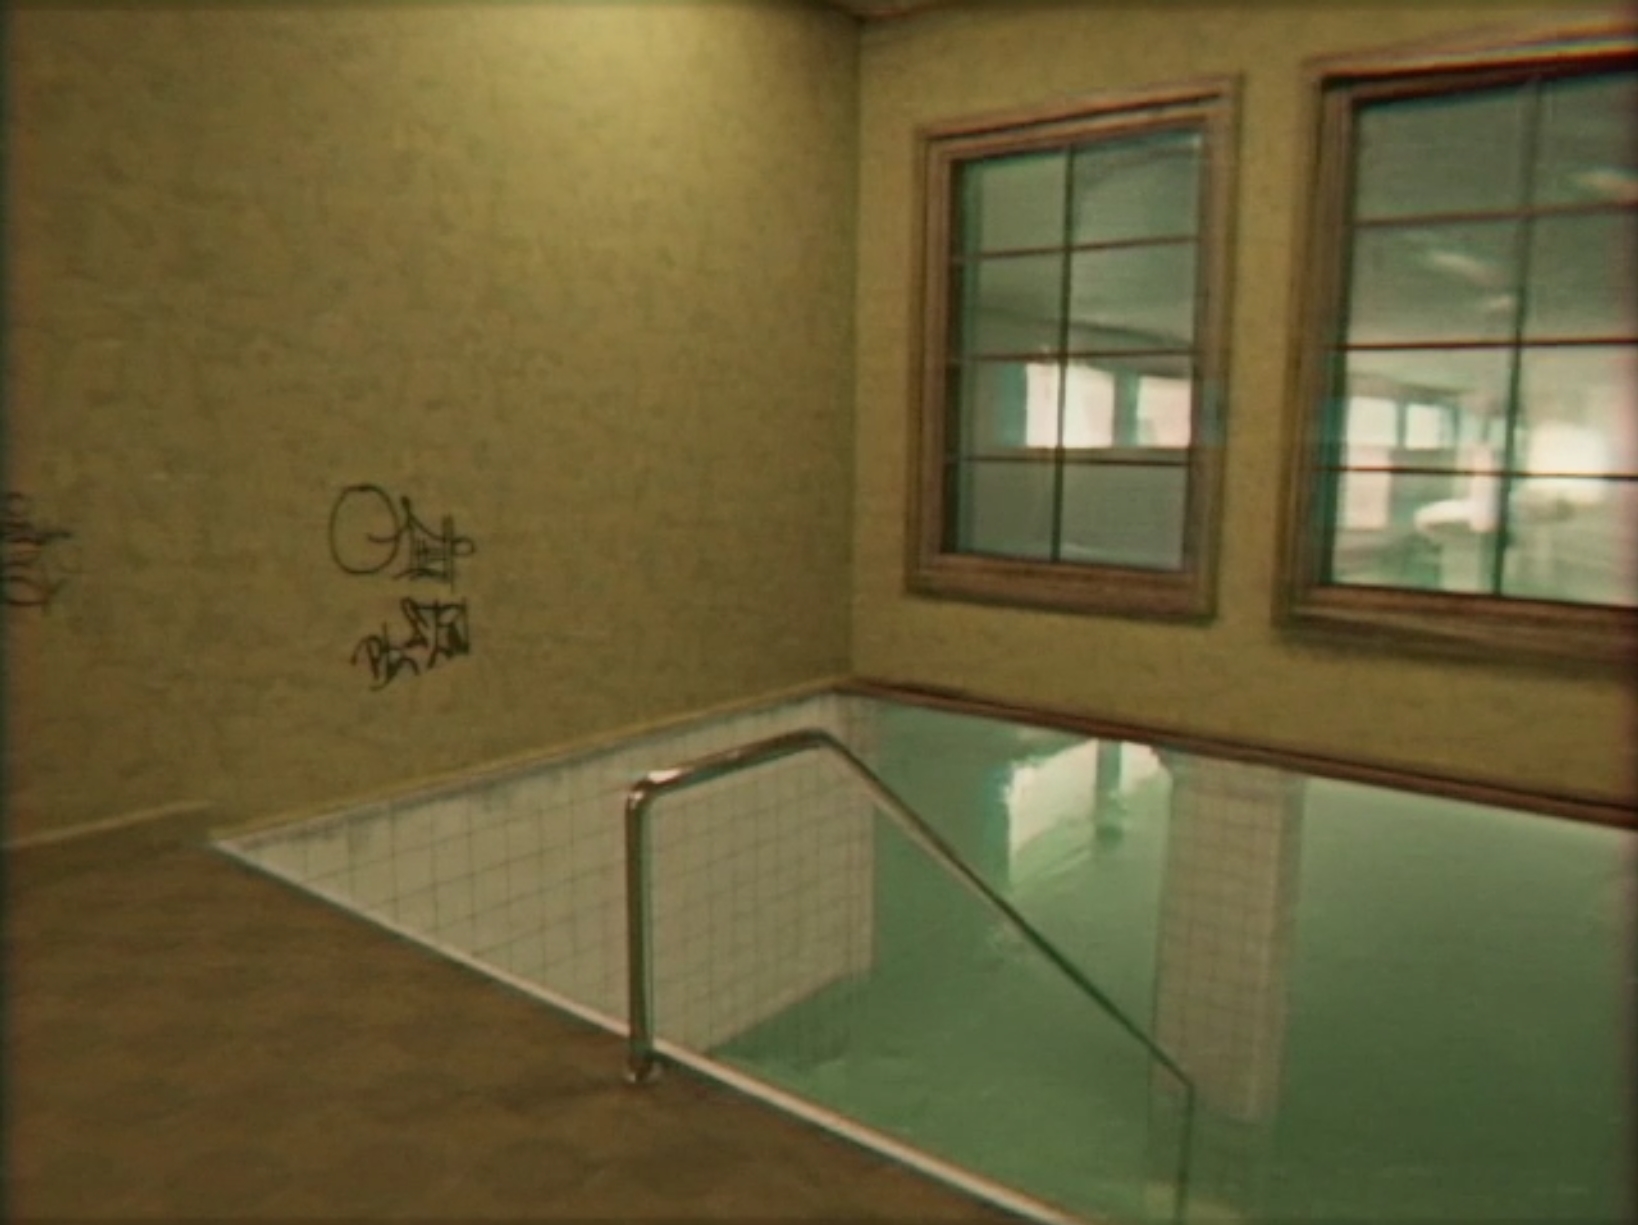 Course: 'Create Poolrooms And Animate Realistic Water in Blender' [$] -  BlenderNation